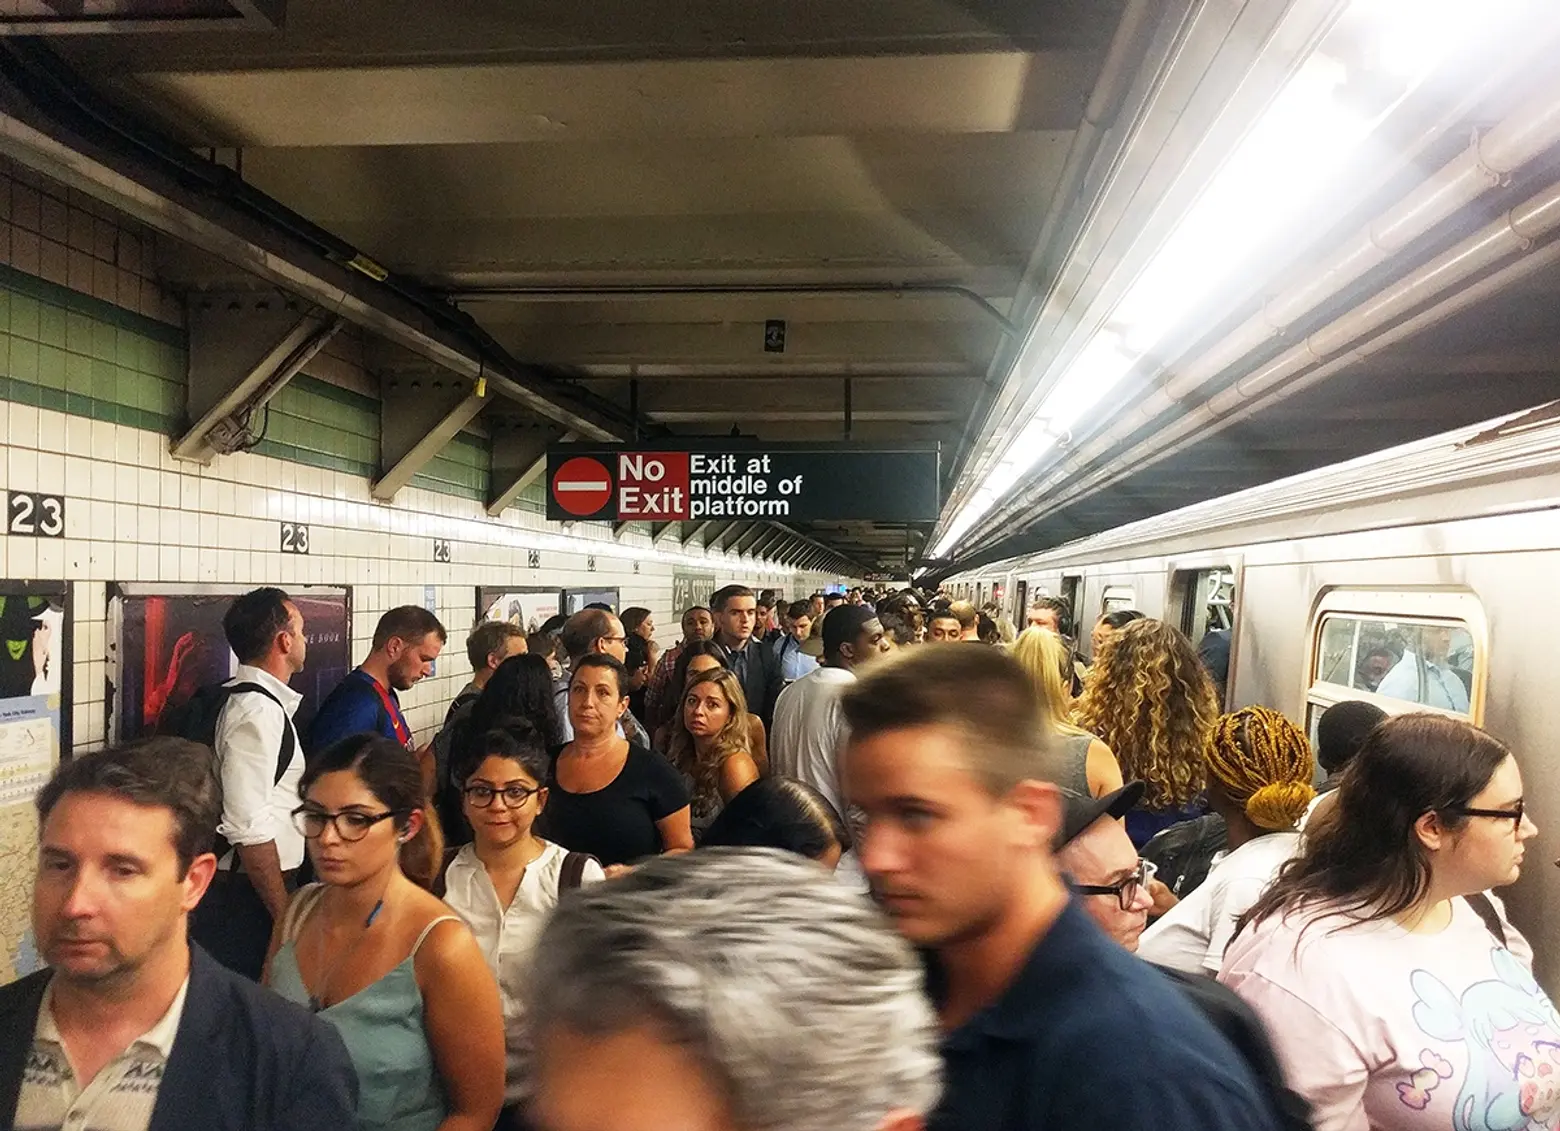 New York lawmakers have underinvested in the subway system for decades, report finds